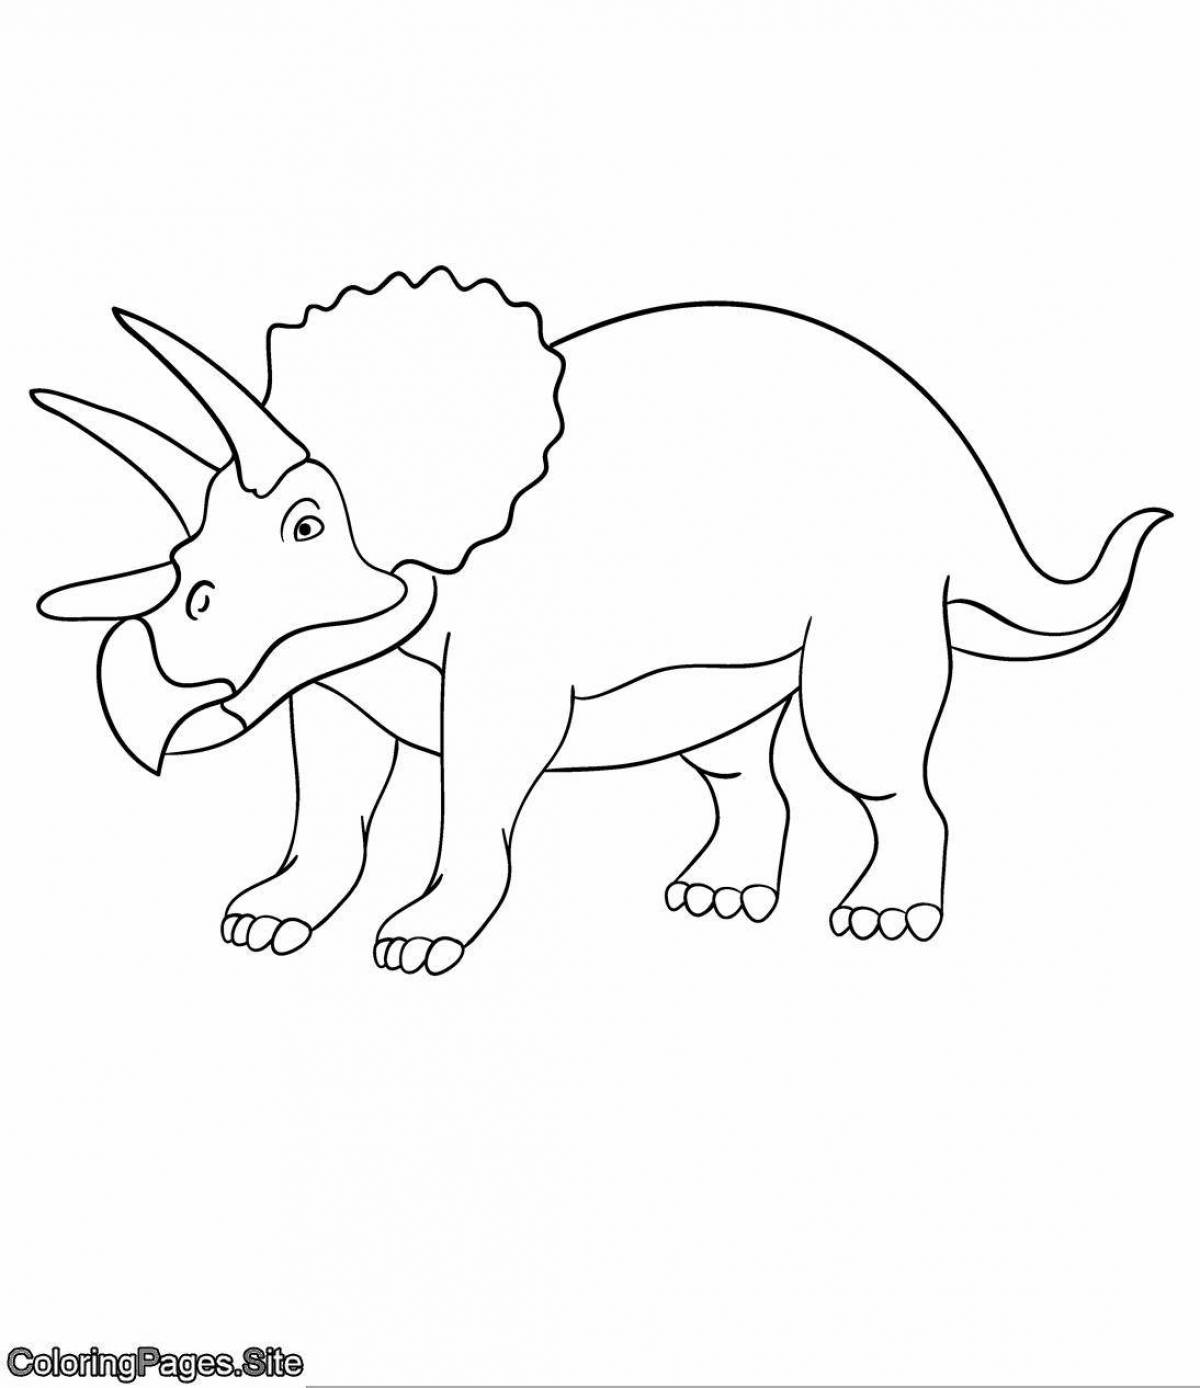 Sweet triceratops coloring page